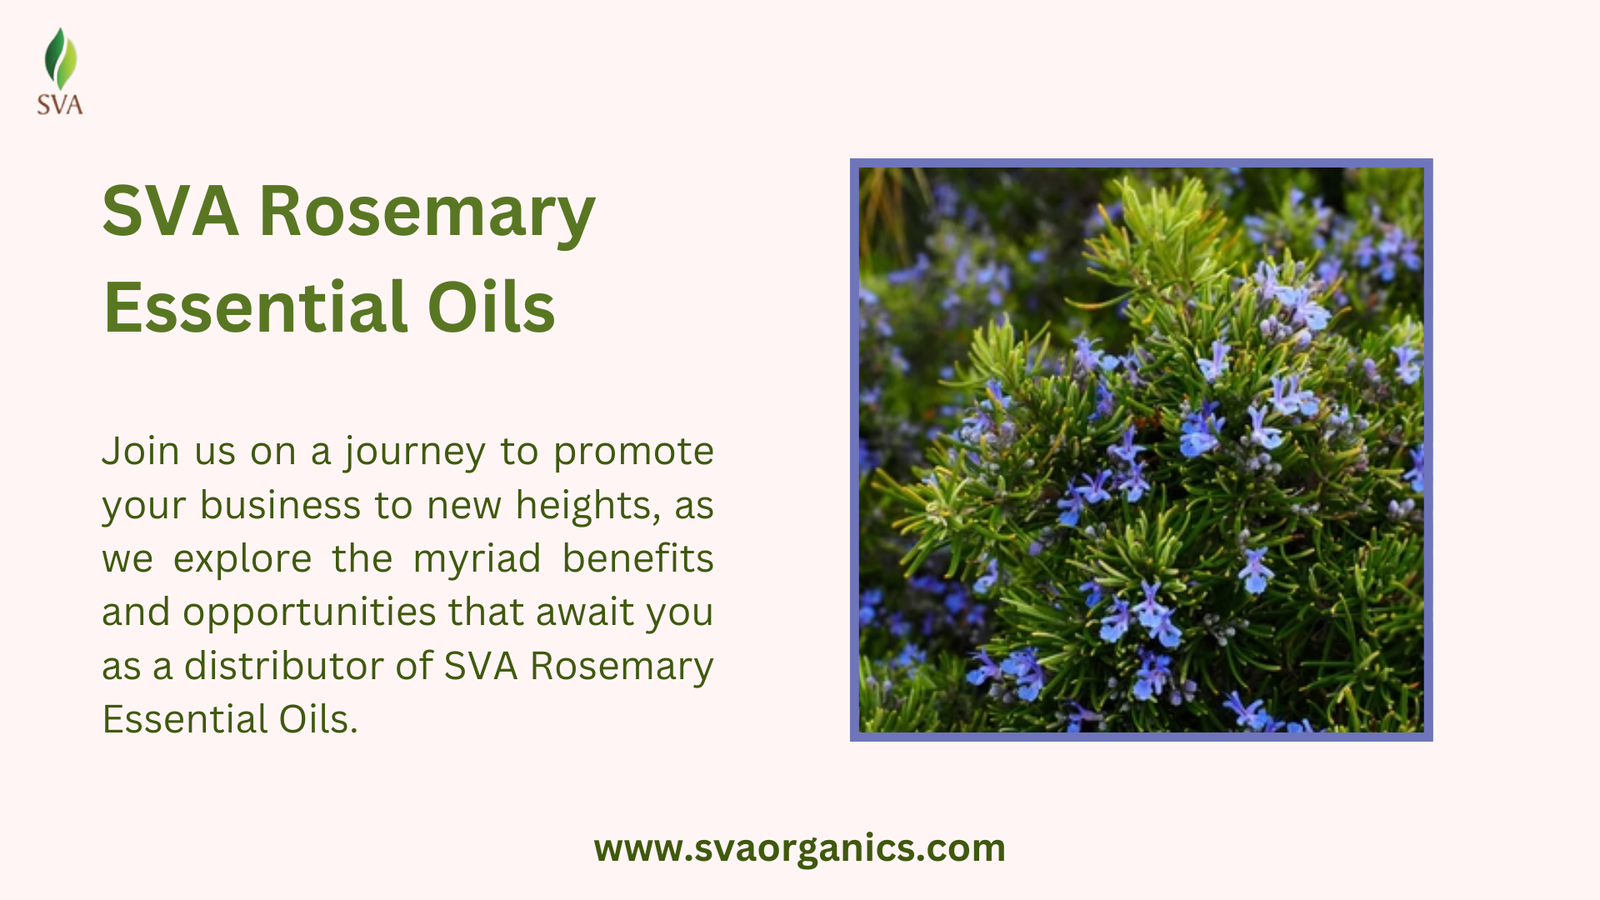 Discover The Potential: Transform Your Business With SVA Rosemary Essential Oils - TIMES OF RISING